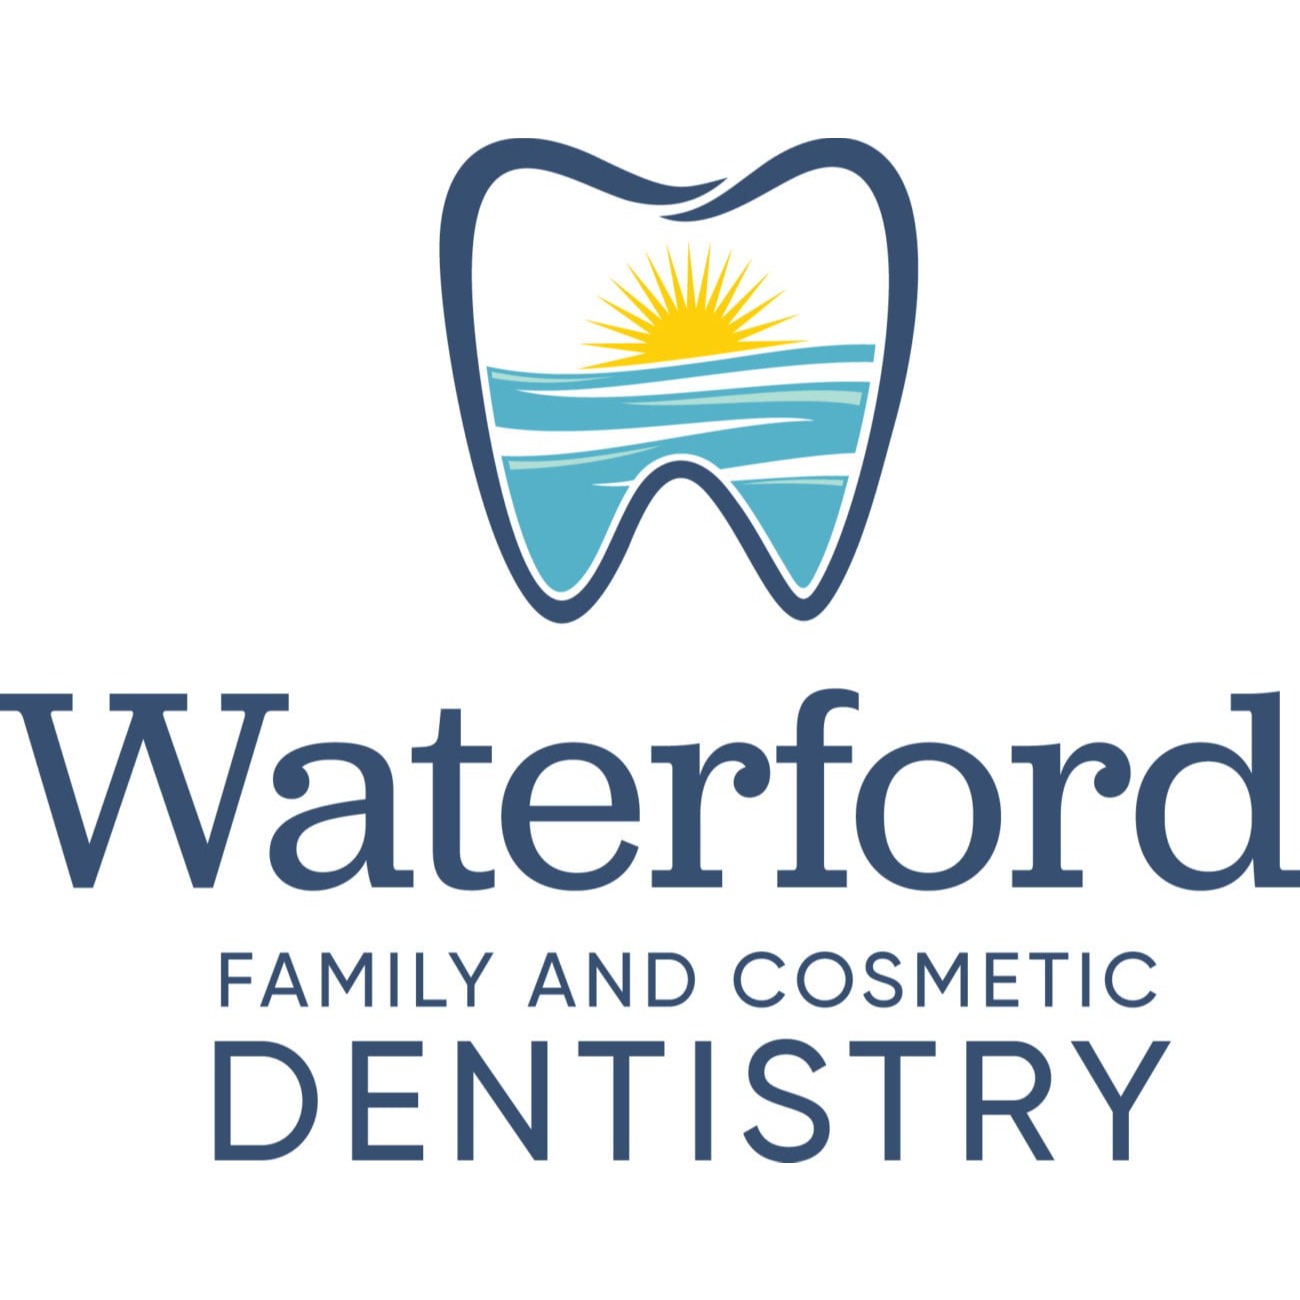 Waterford Family & Cosmetic Dentistry - Leland, NC 28451 - (910)383-0100 | ShowMeLocal.com